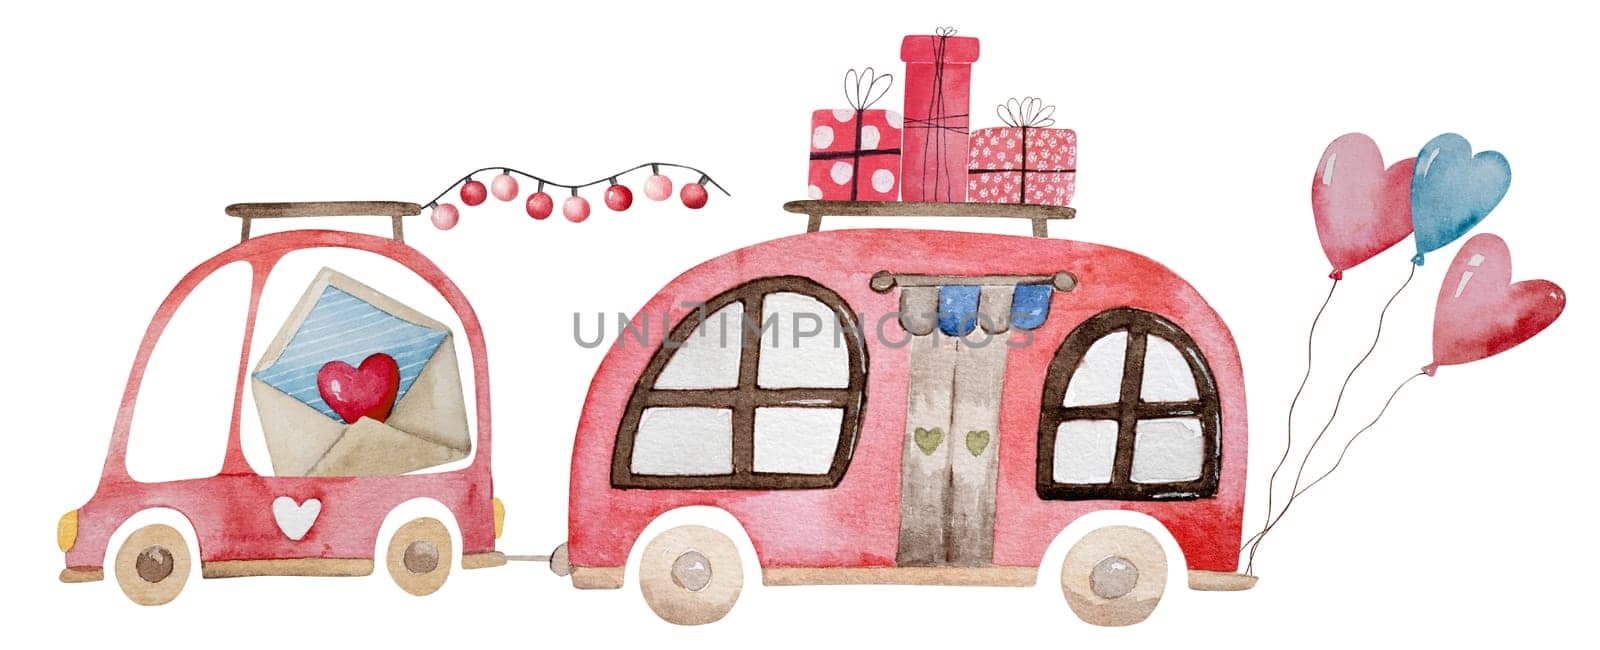 Hand-Drawn Watercolor Illustration Clipart For February 14Th Featuring A Car And Mobile Home With Valentine'S Day Gifts by tan4ikk1